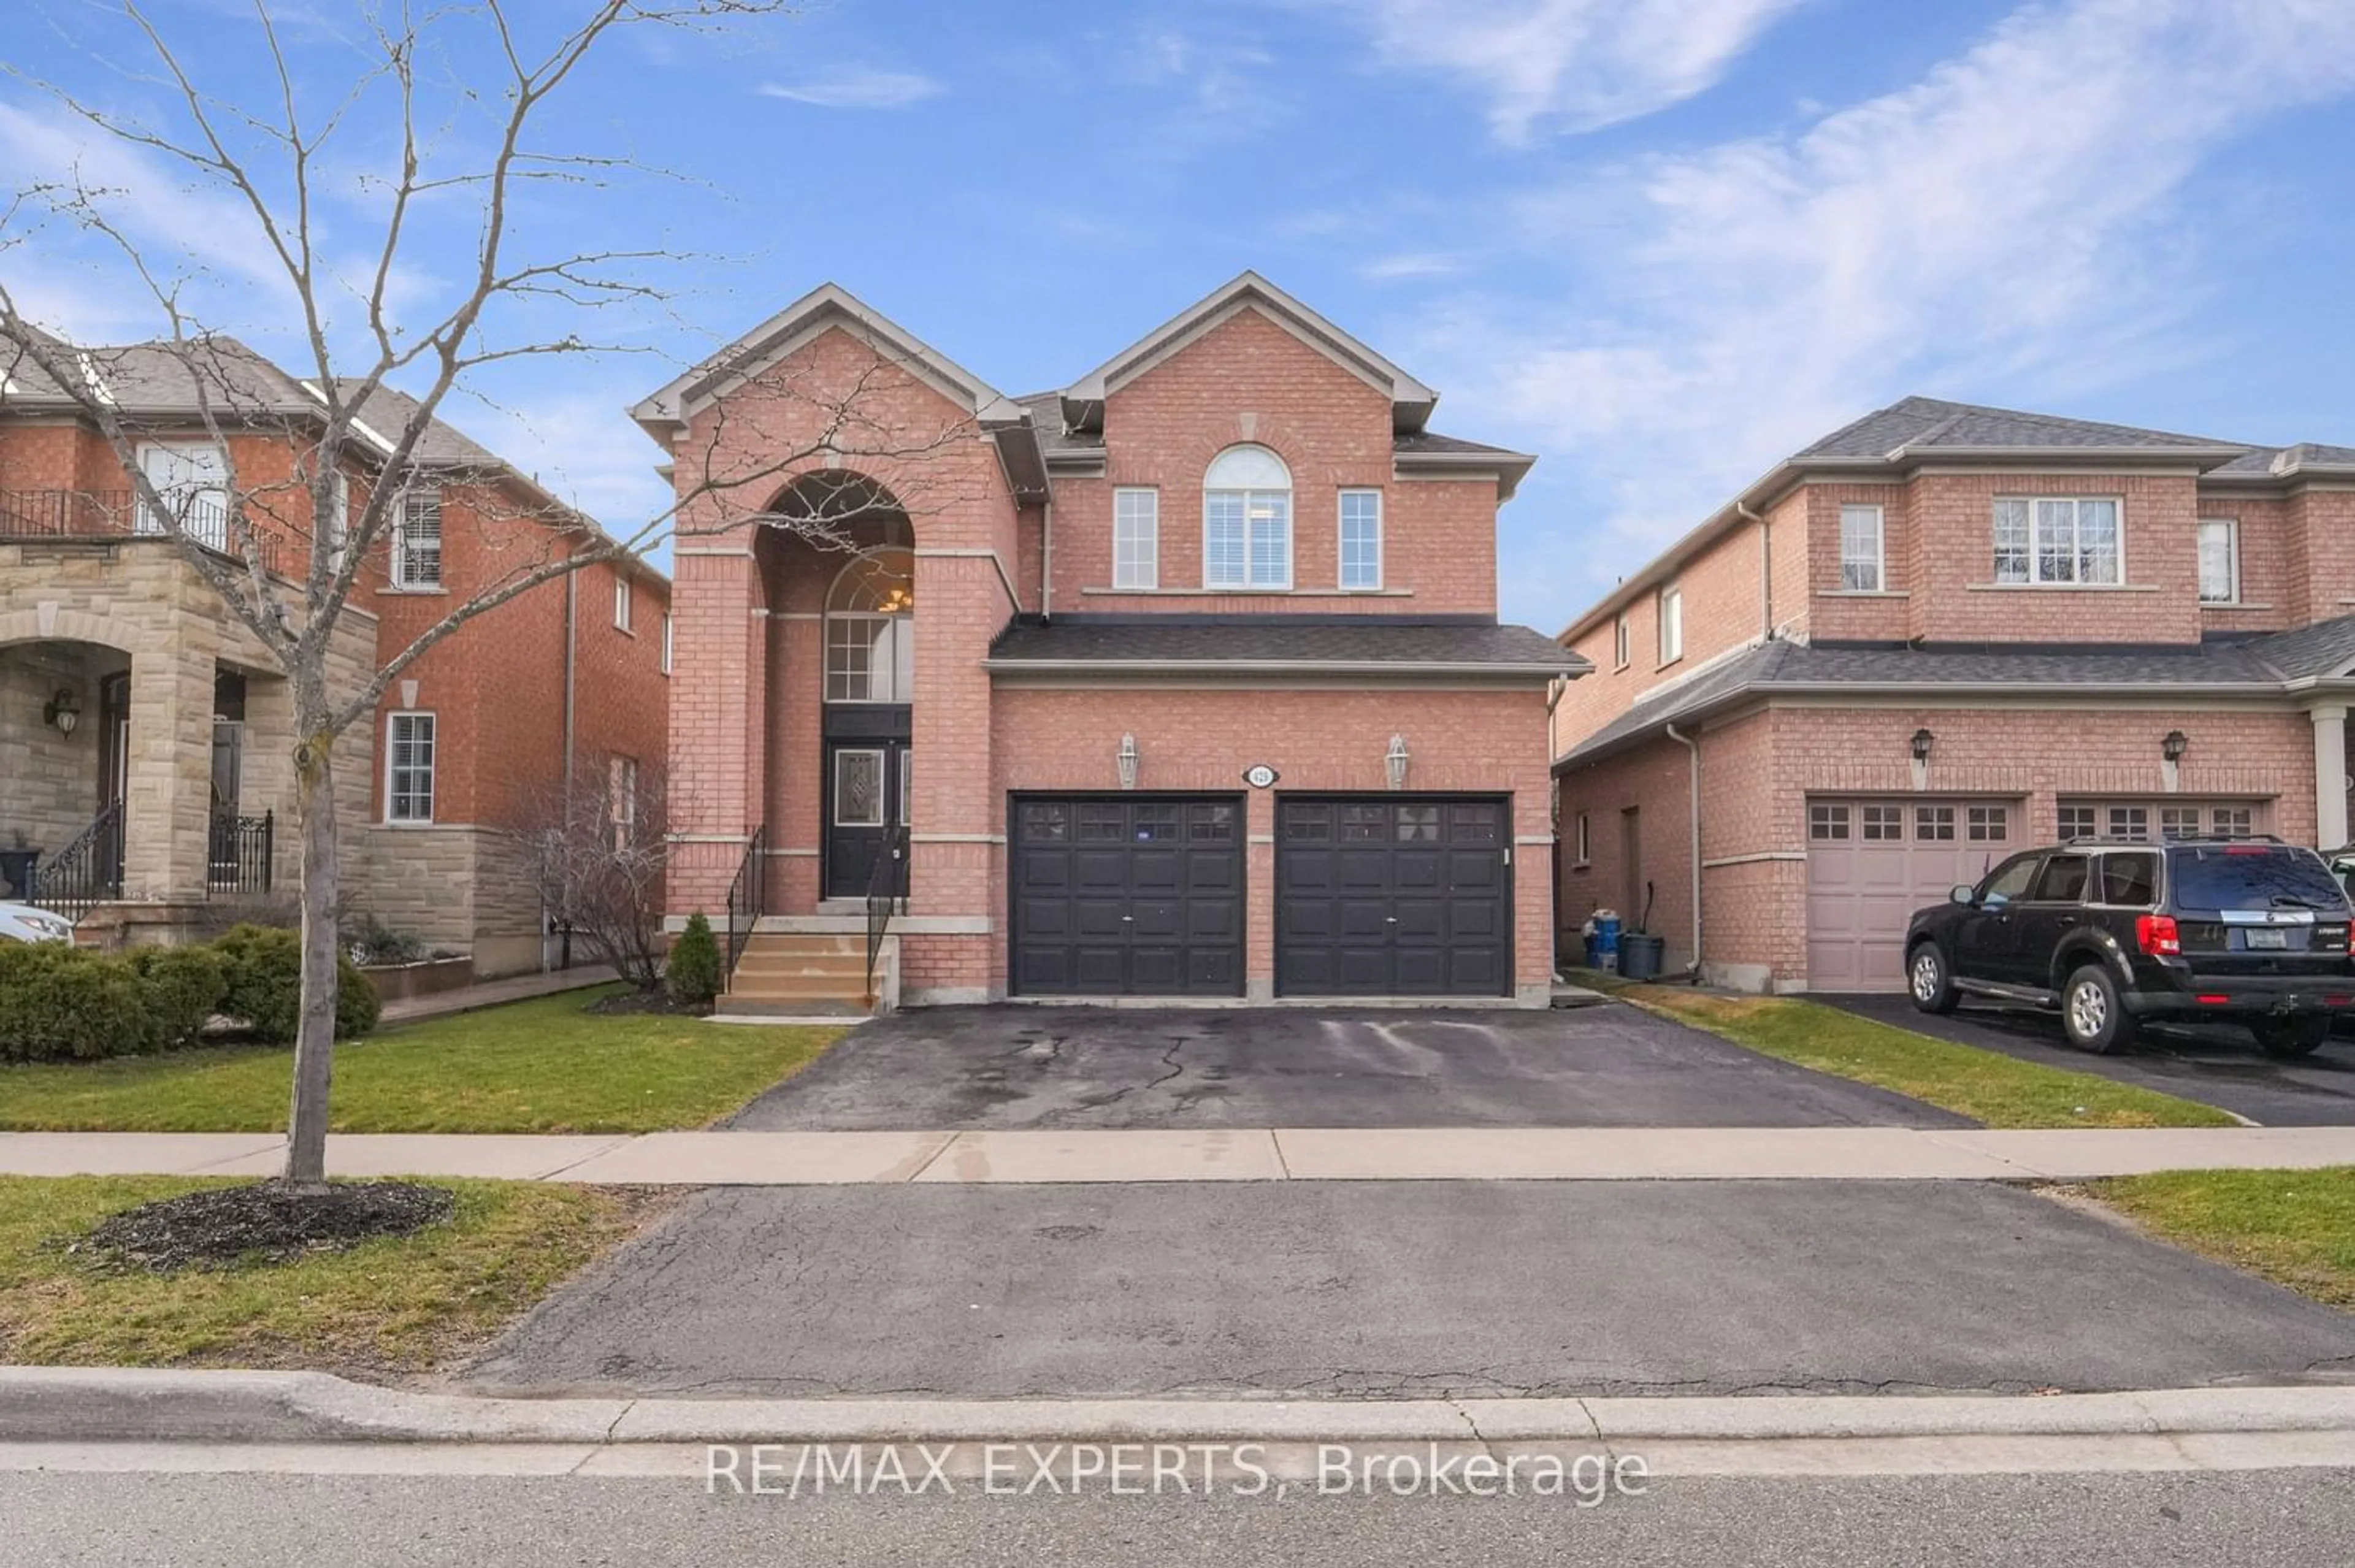 Frontside or backside of a home for 429 Sonoma Blvd, Vaughan Ontario L4H 2S3